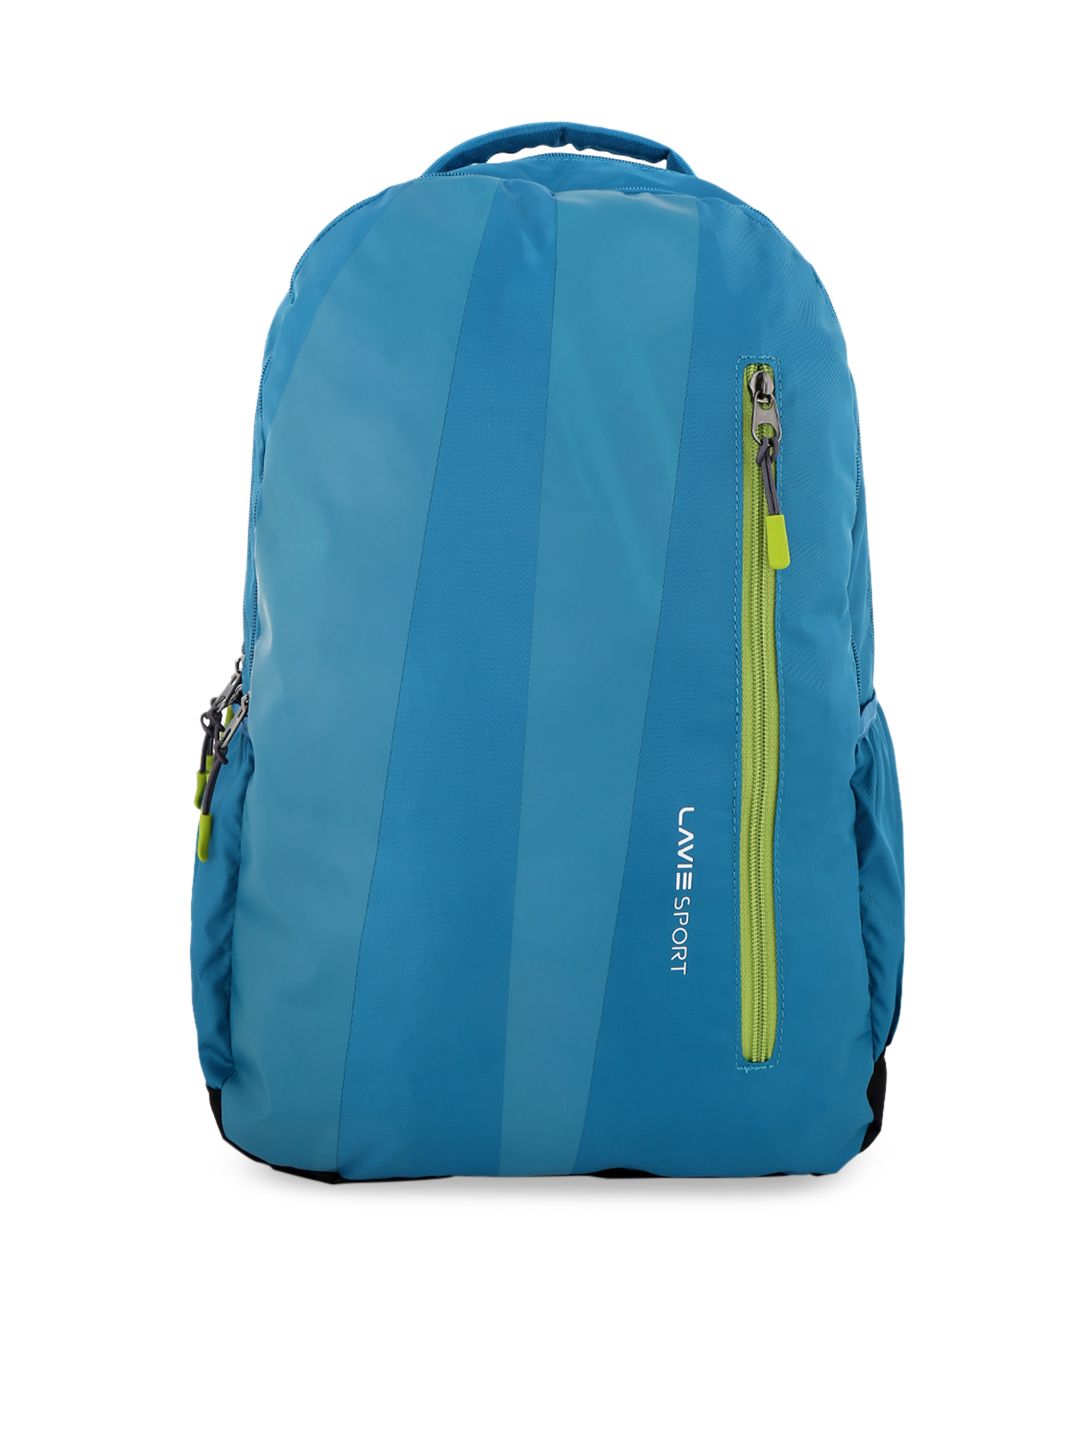 LAVIE SPORT Unisex Blue & Green Graphic Backpack Price in India